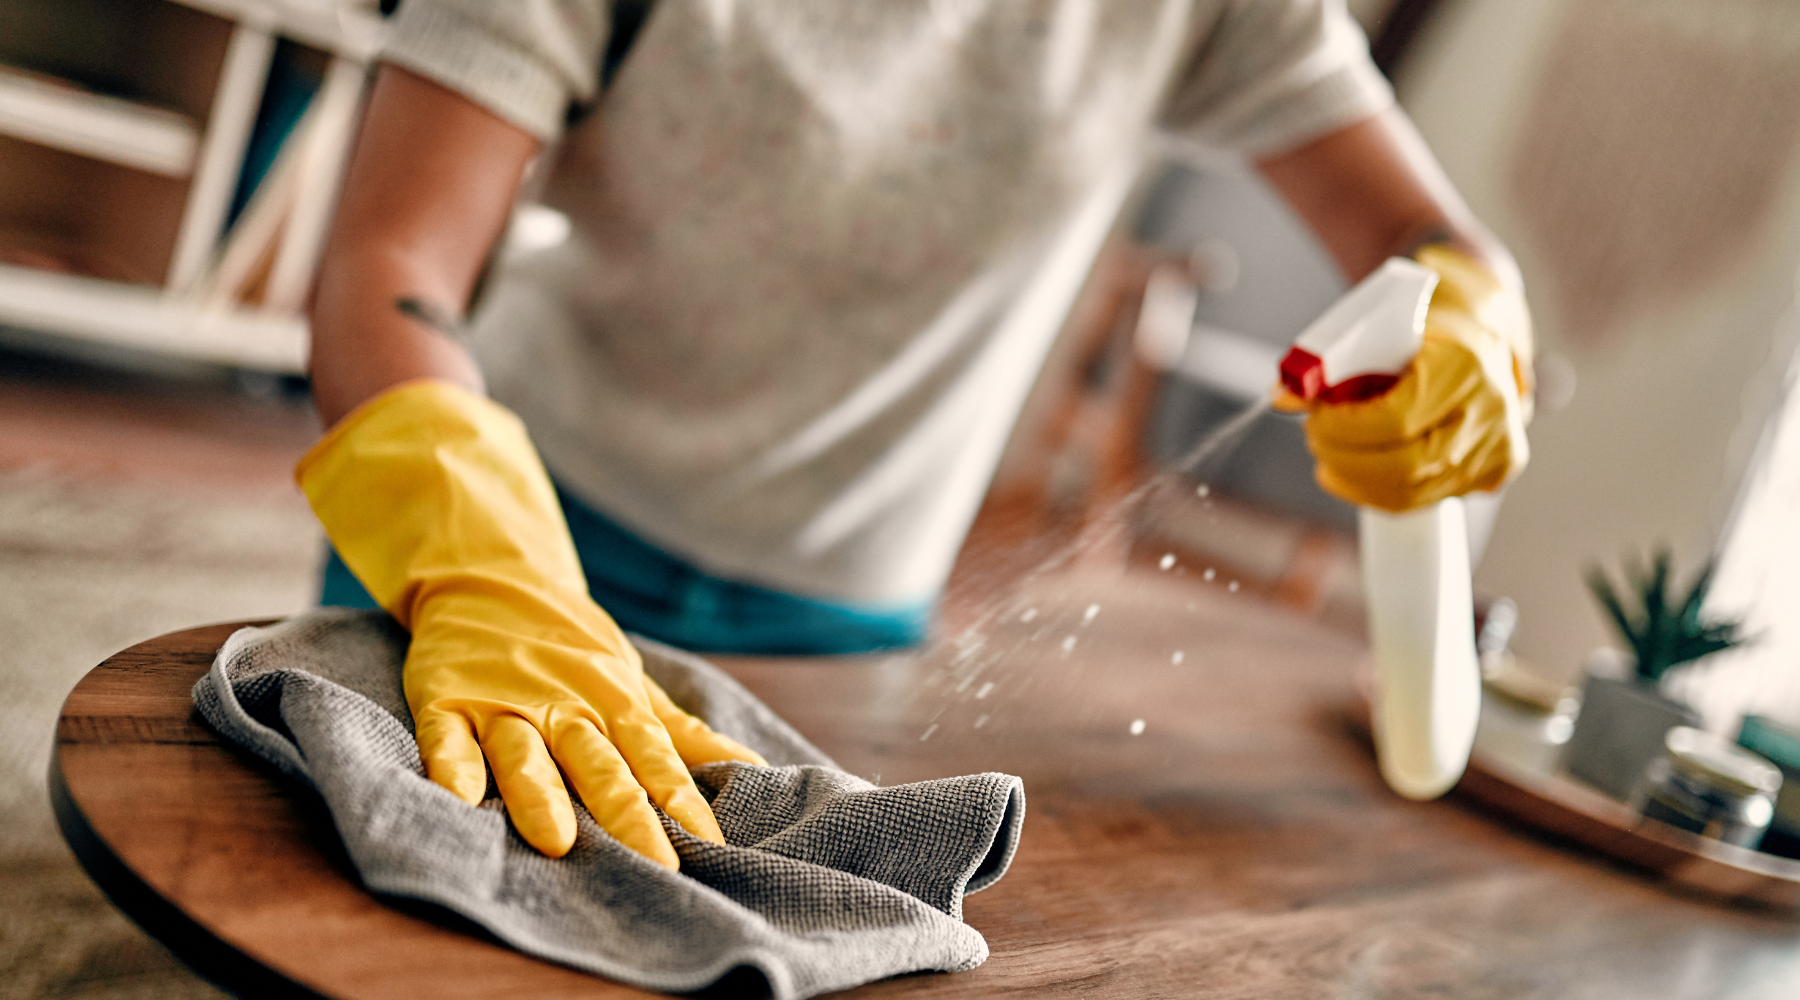 a person wearing yellow gloves is cleaning a wooden table with a cloth and spray bottle .